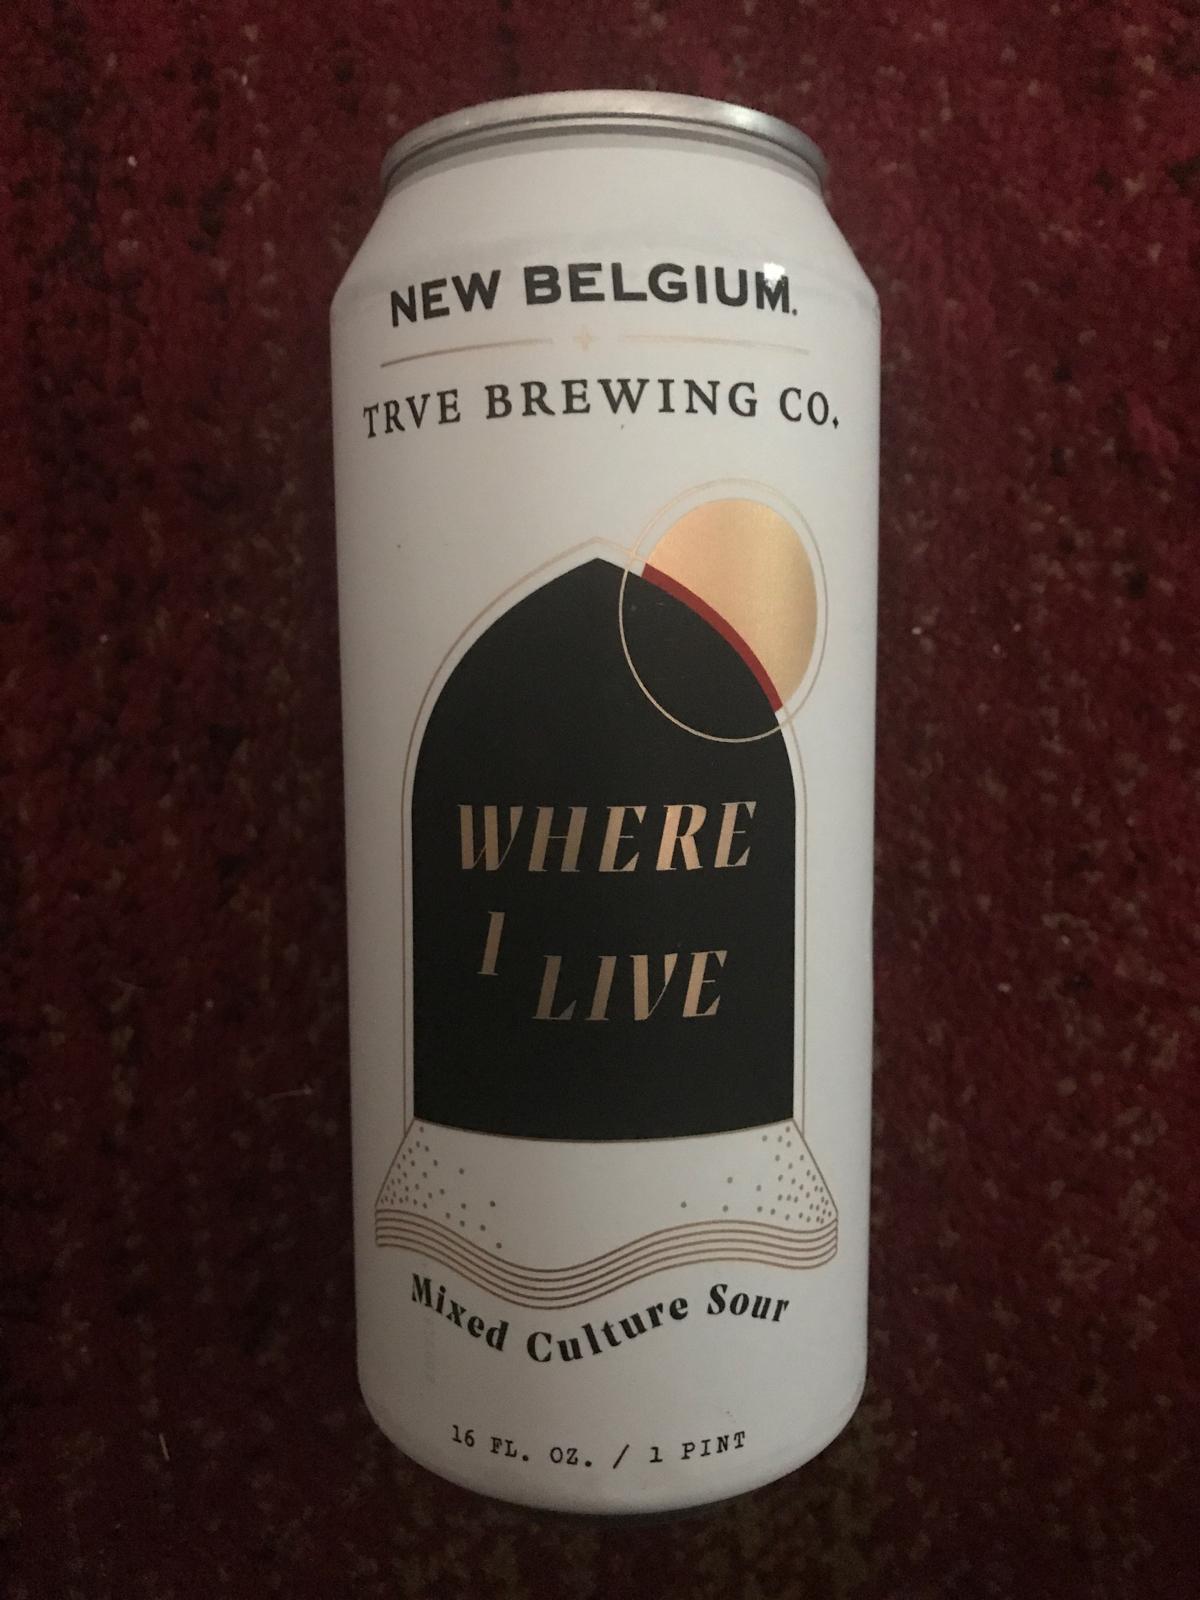 Where I Live (Collaboration with Trve Brewing Co)